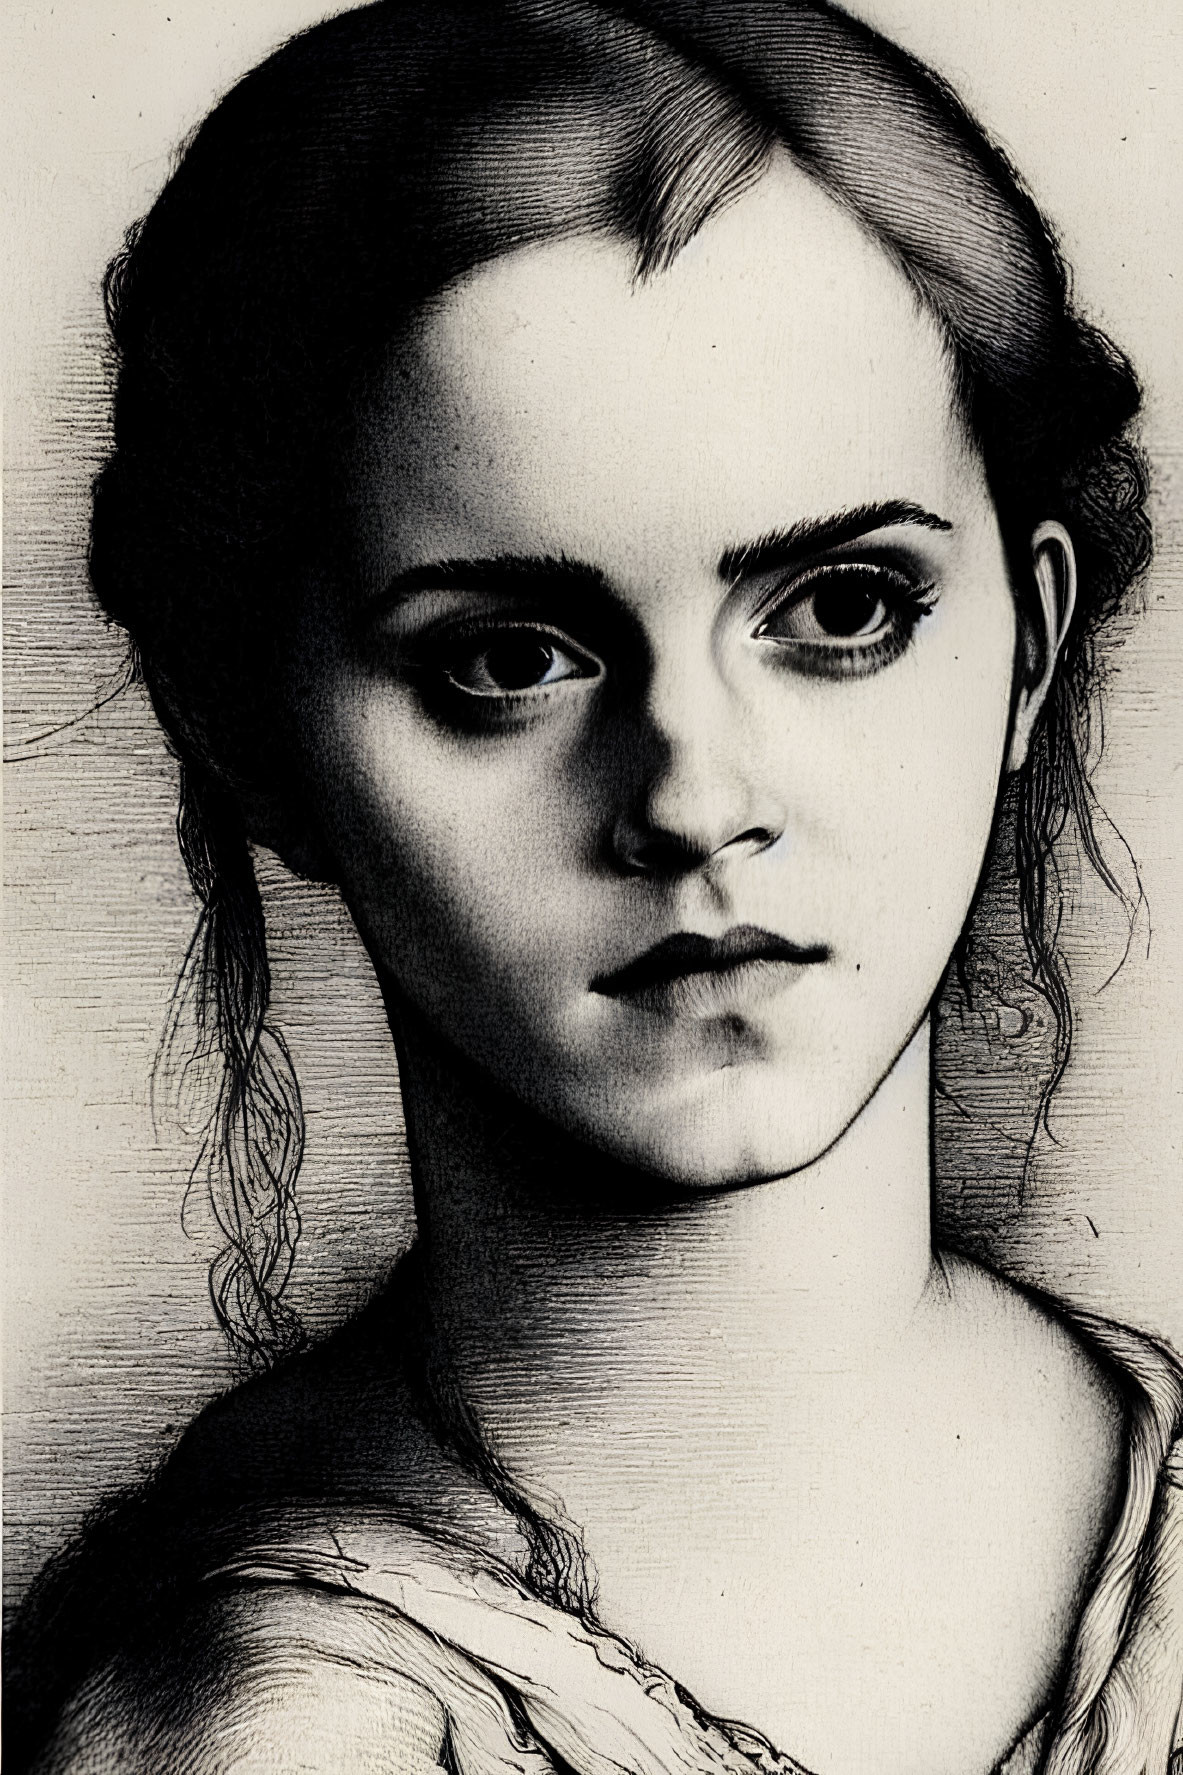 Detailed black and white sketch of young woman with intense eyes, neat eyebrows, straight nose, and w